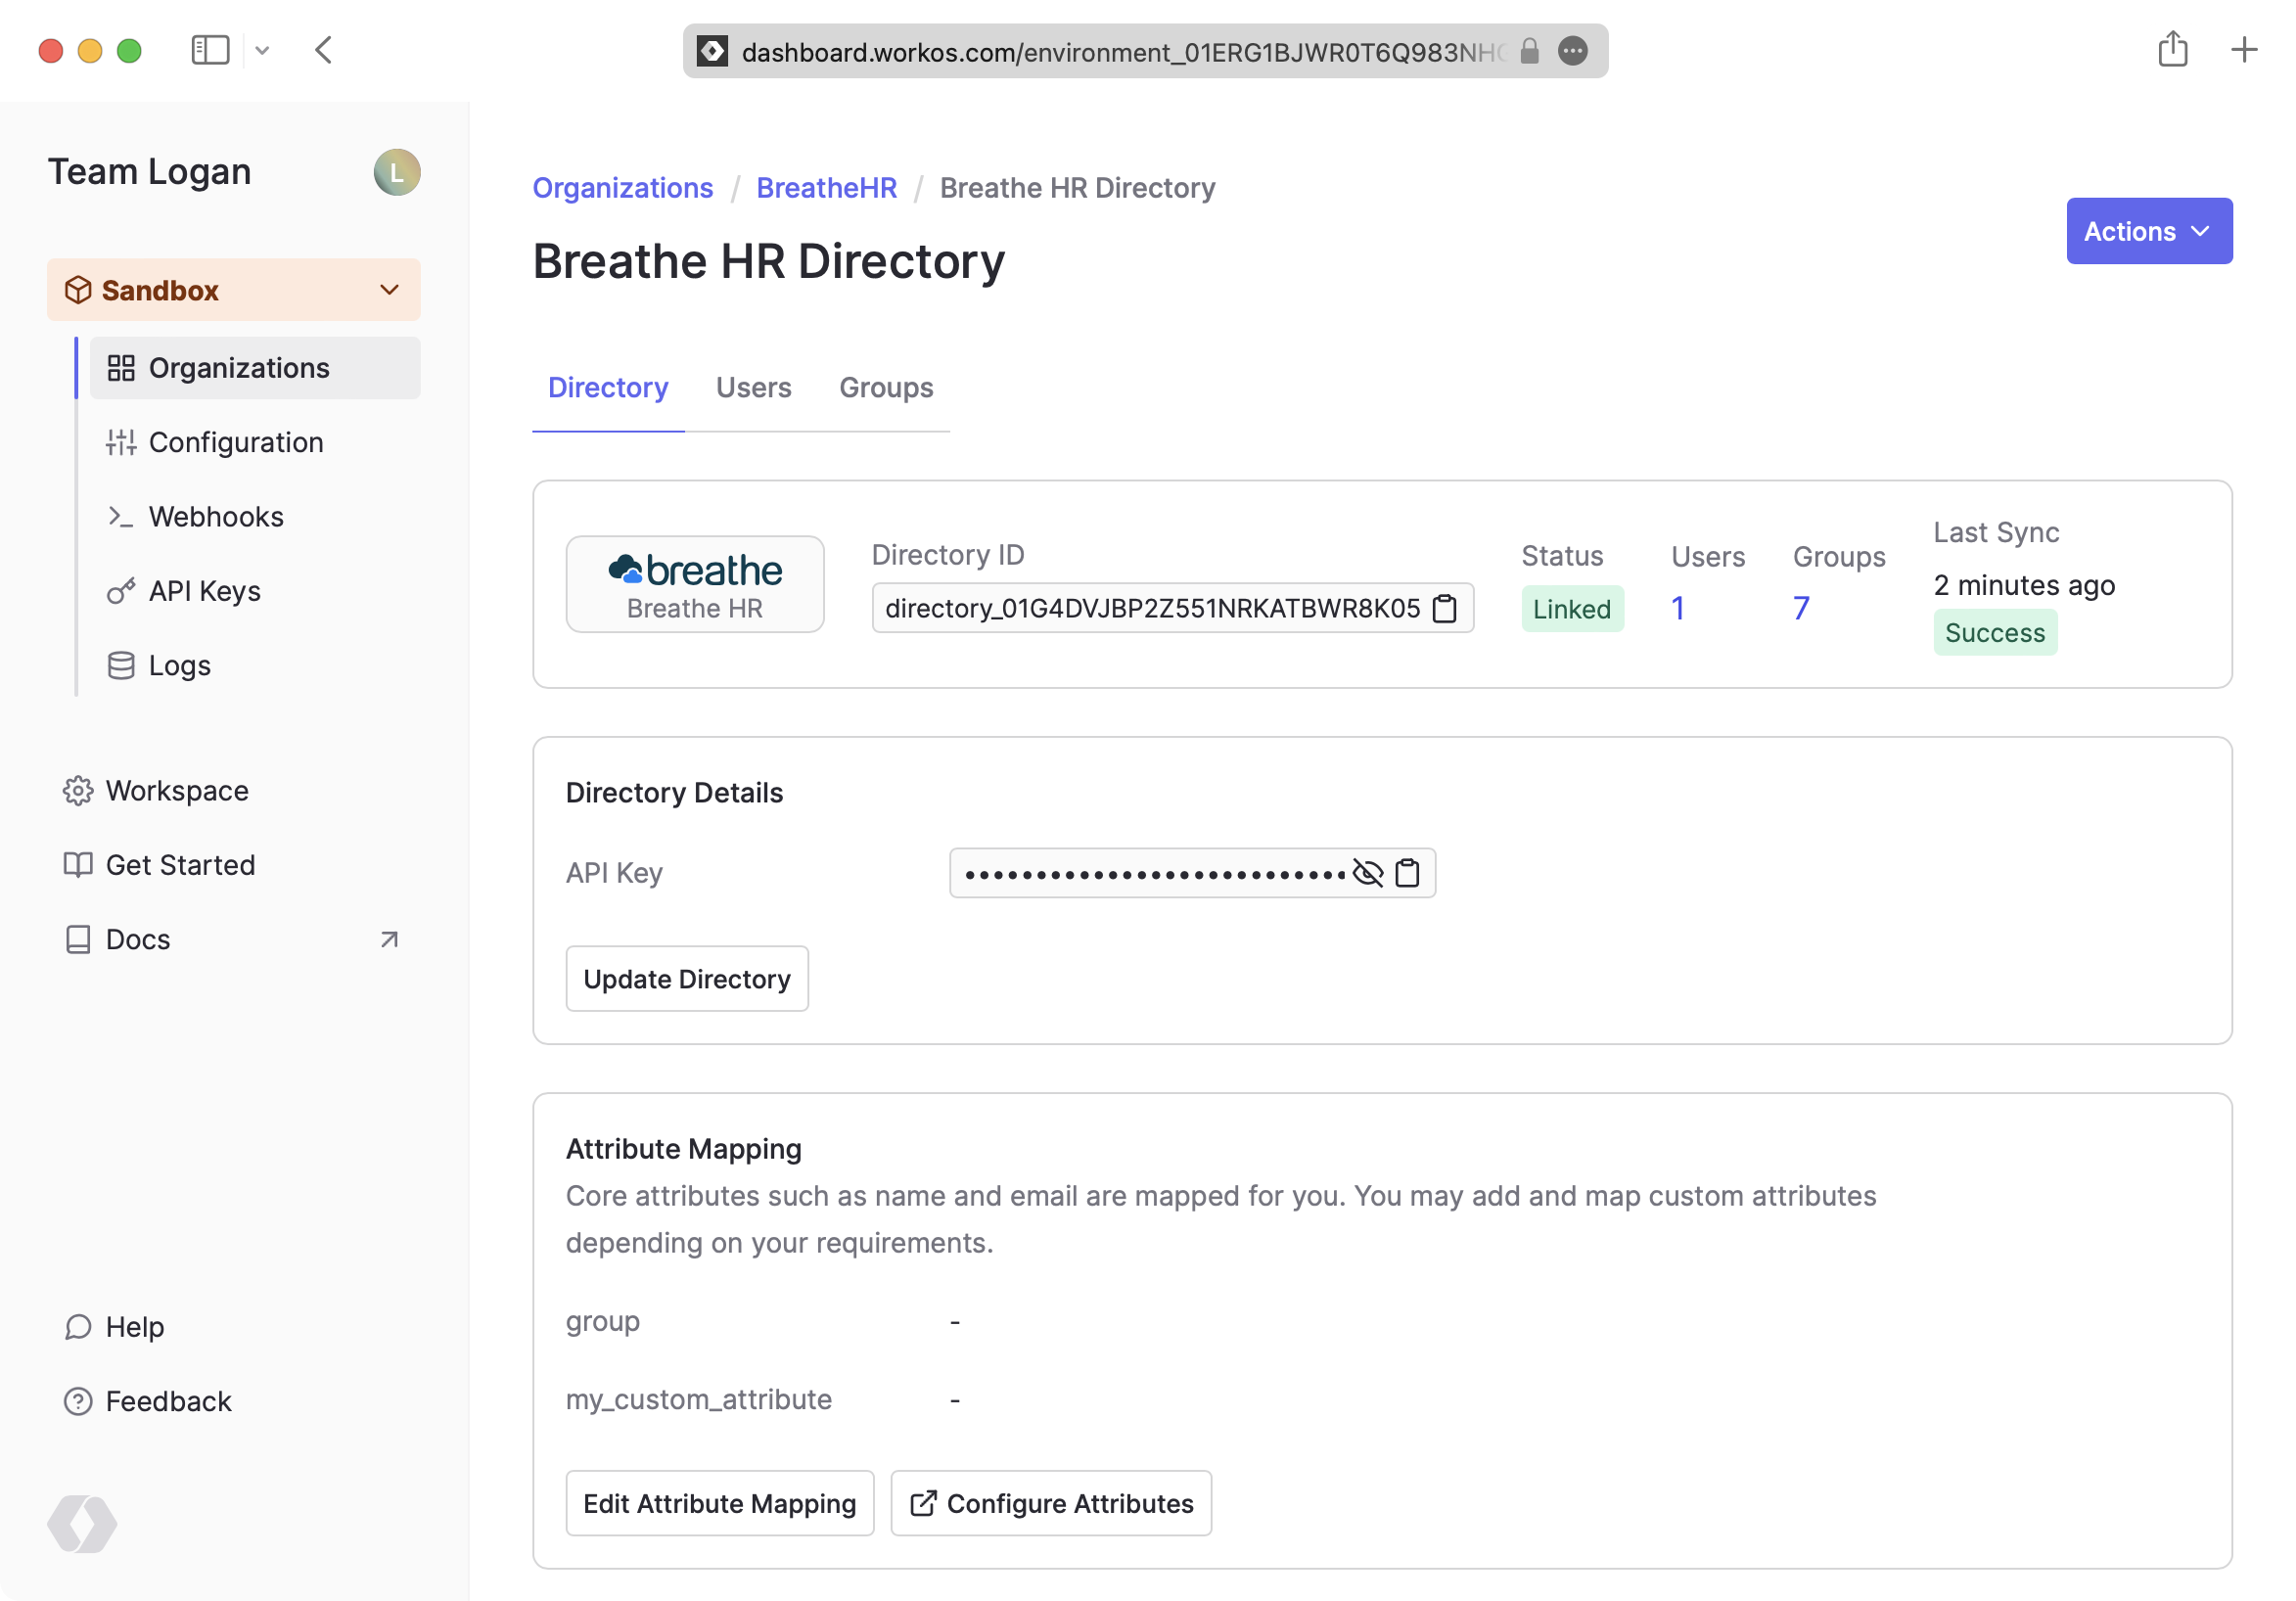 view users and groups synced from Breathe HR